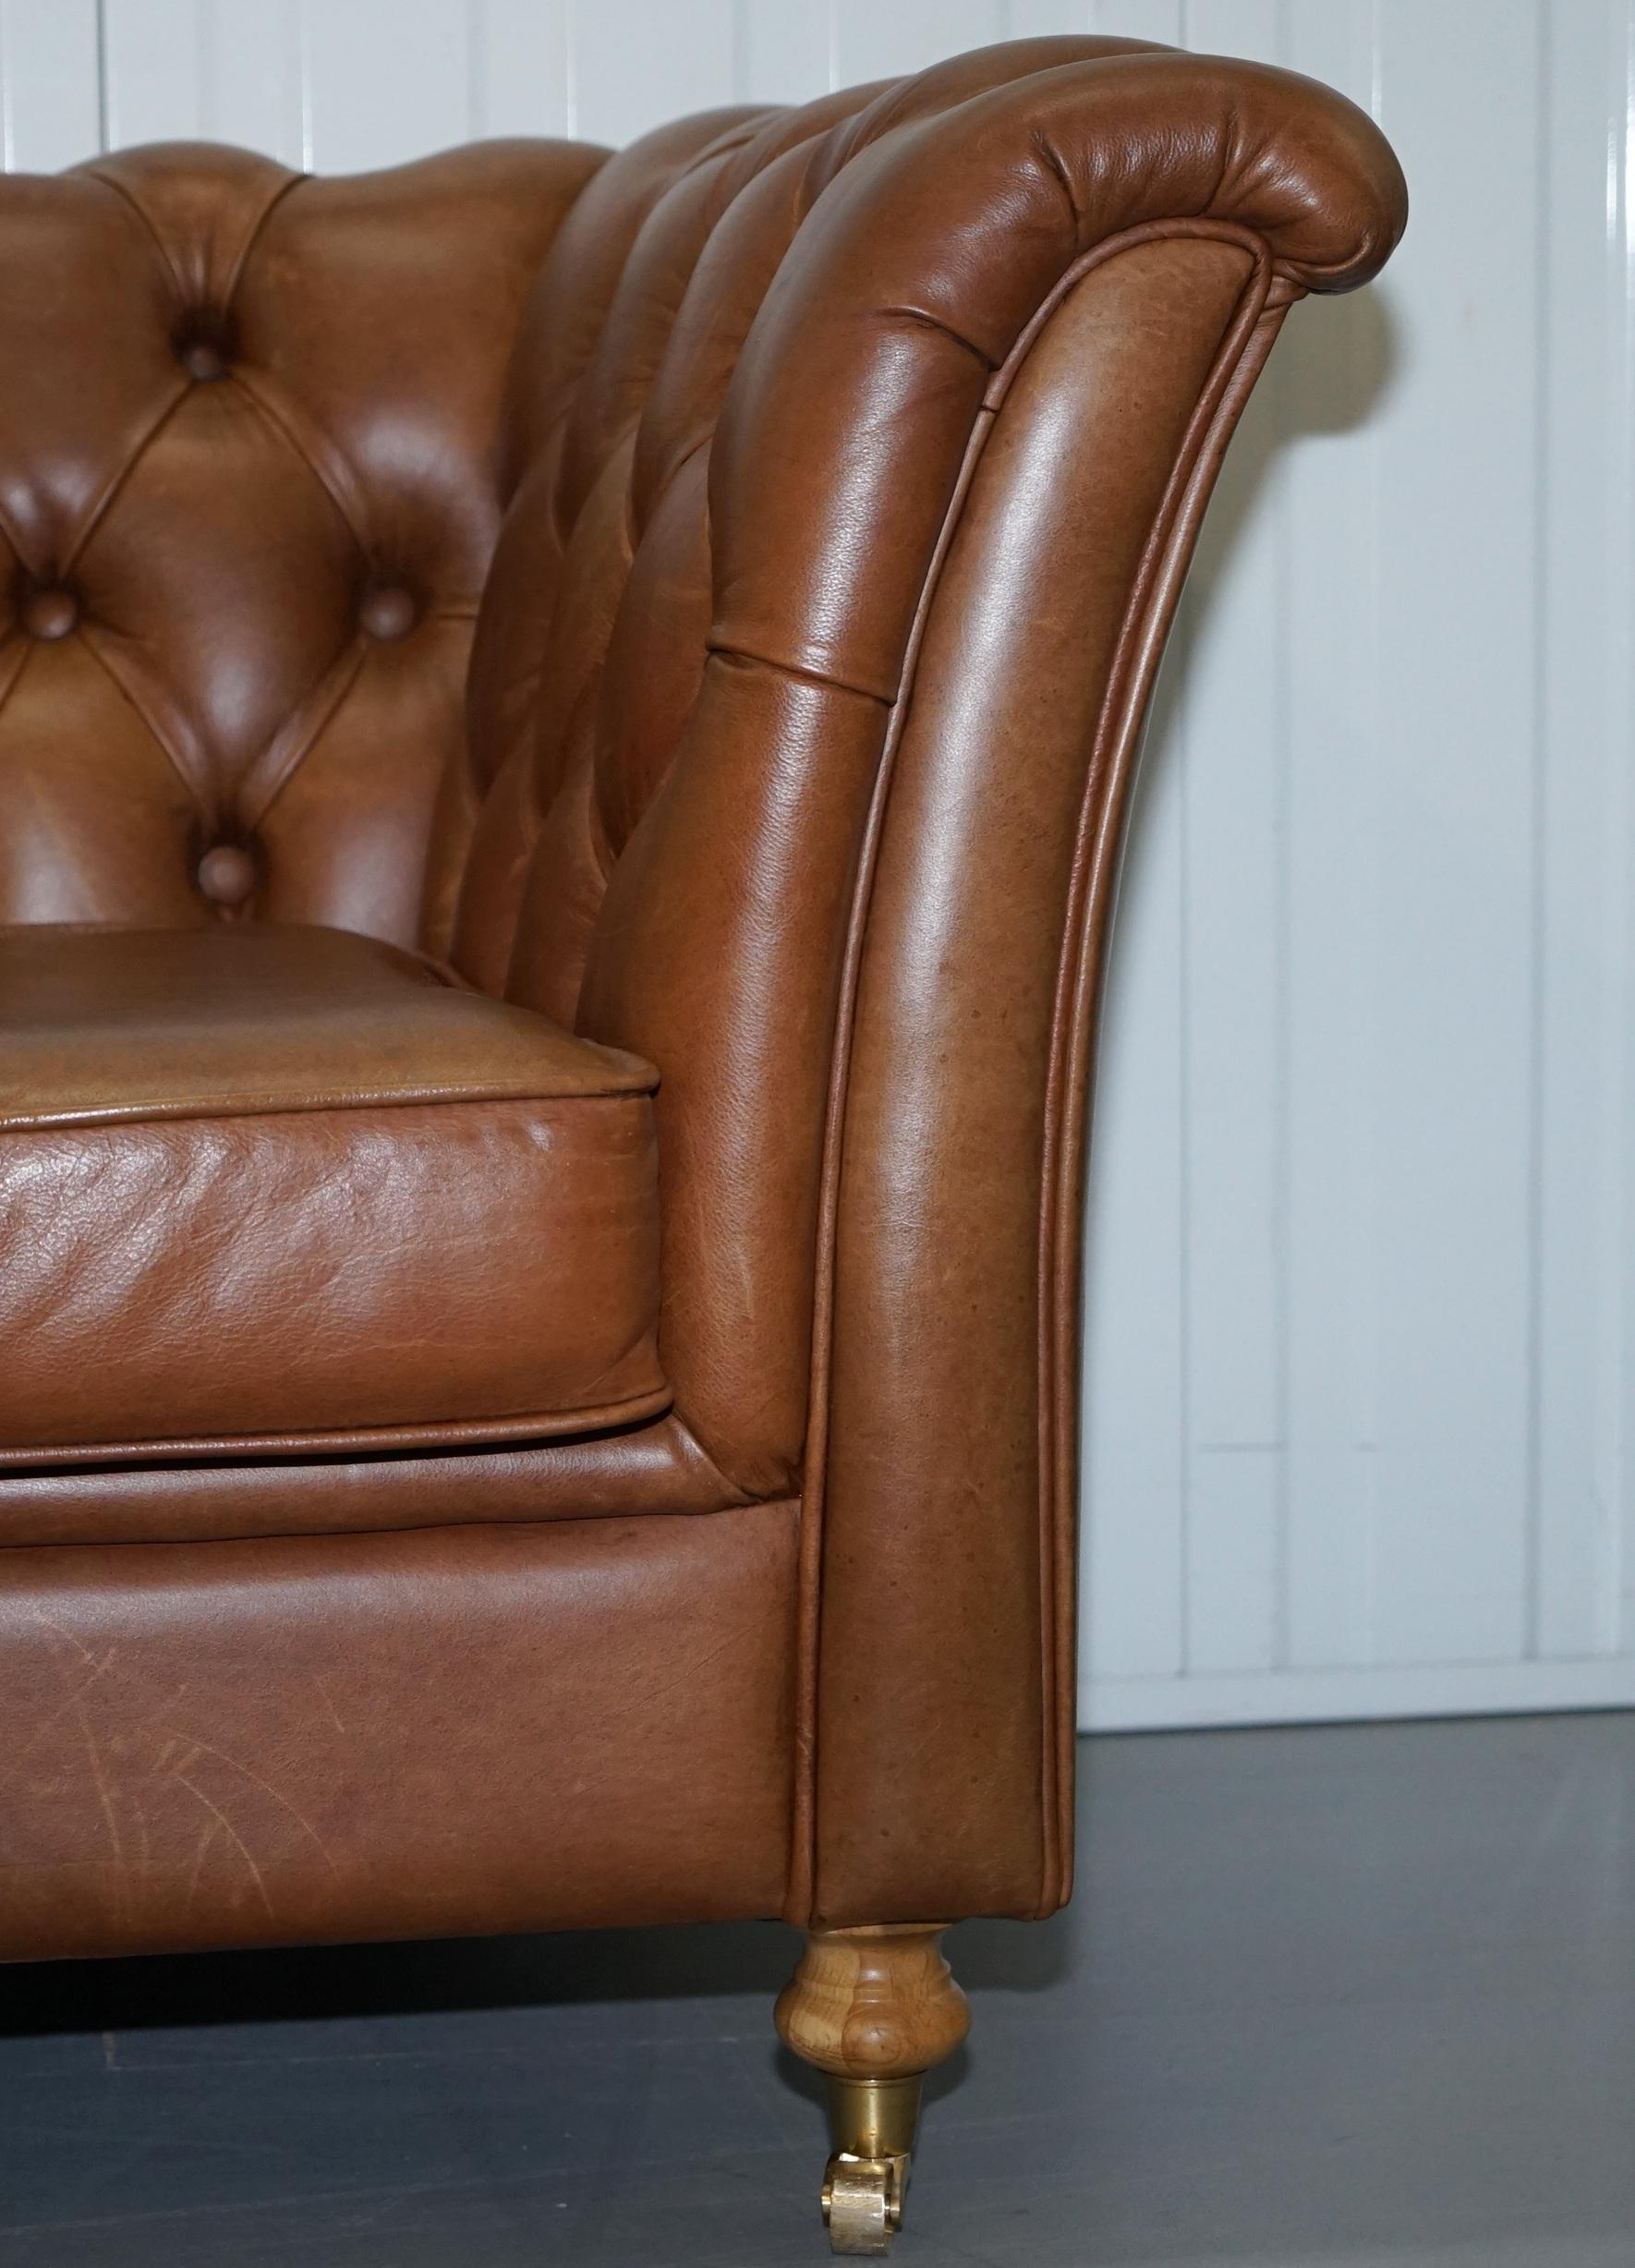 Chestnut Brown Leather Chesterfield Sofa with Turned Oak Legs and Castors 2